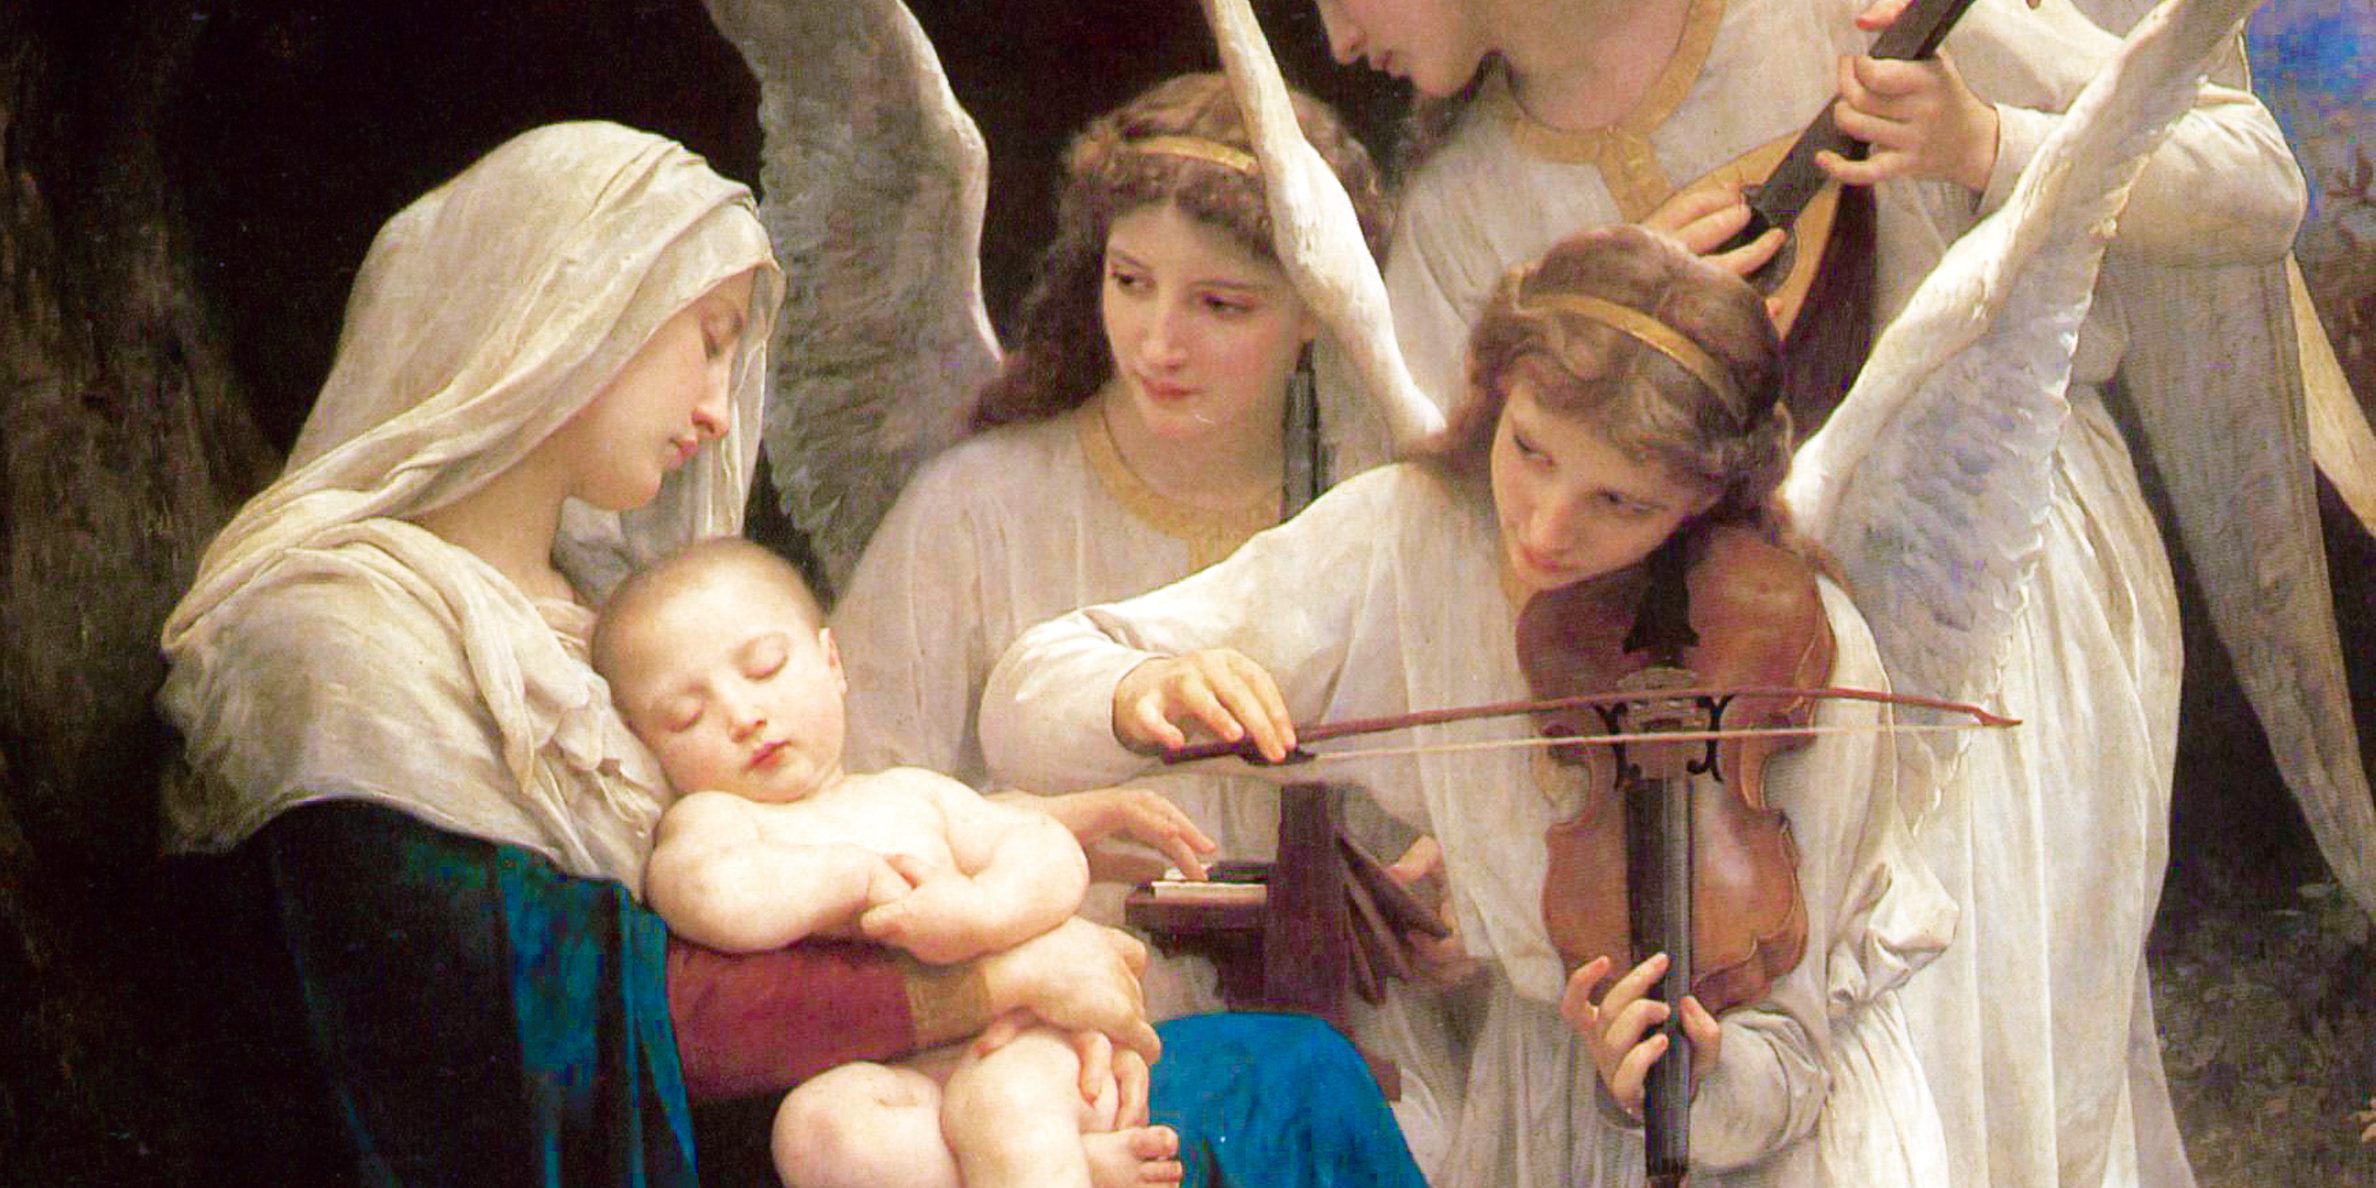 web-song-of-the-angels-mary-jesus-painting-william-adolphe-bouguereau-public-domain-via-wikipedia